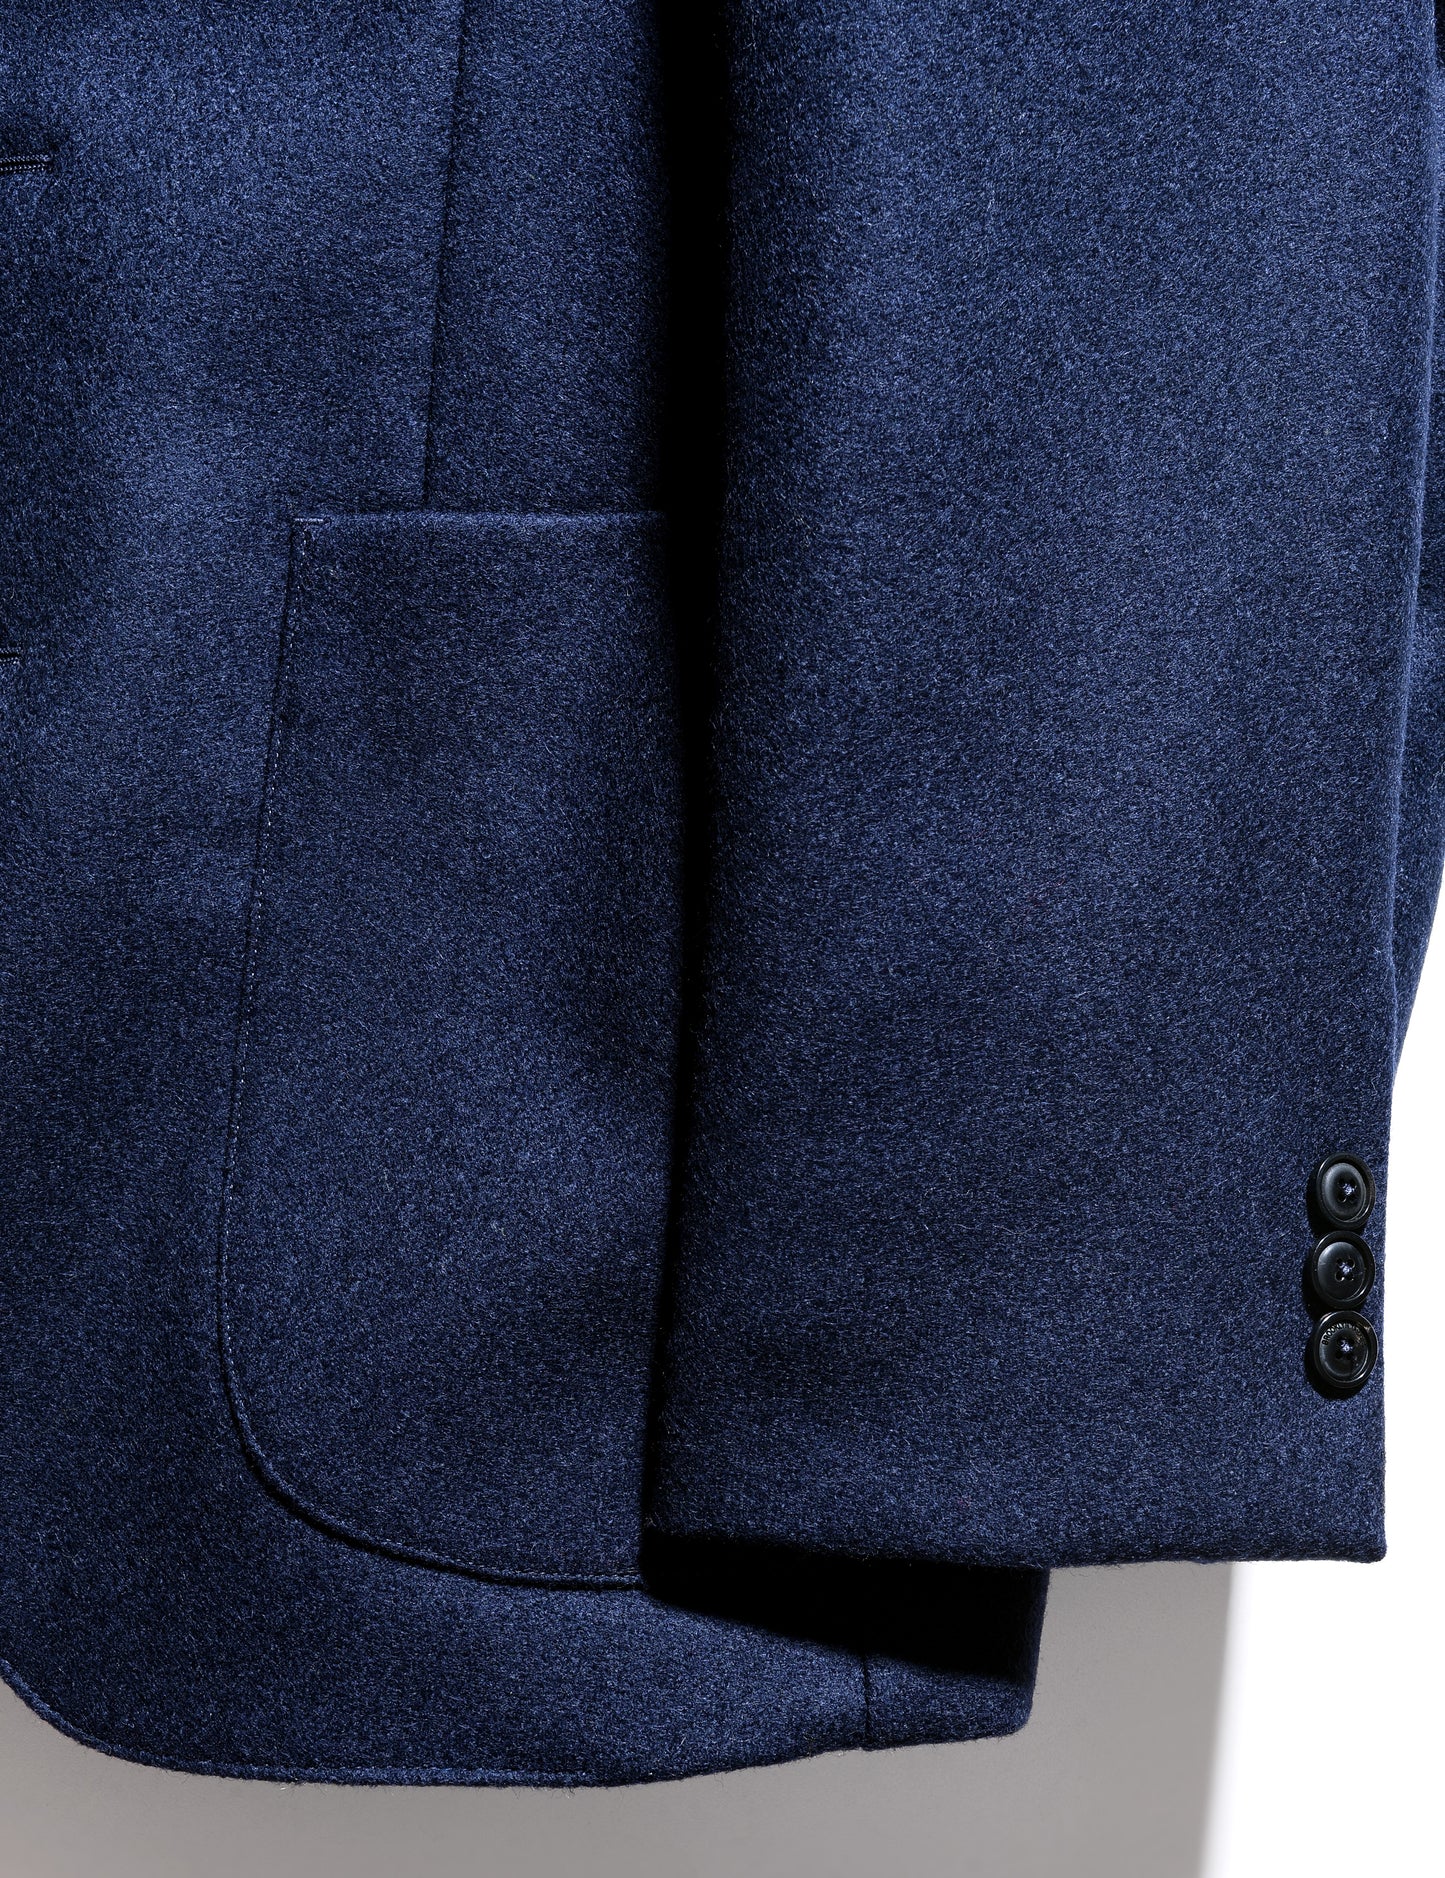 BKT35 Unstructured Jacket in Boiled Wool - Navy